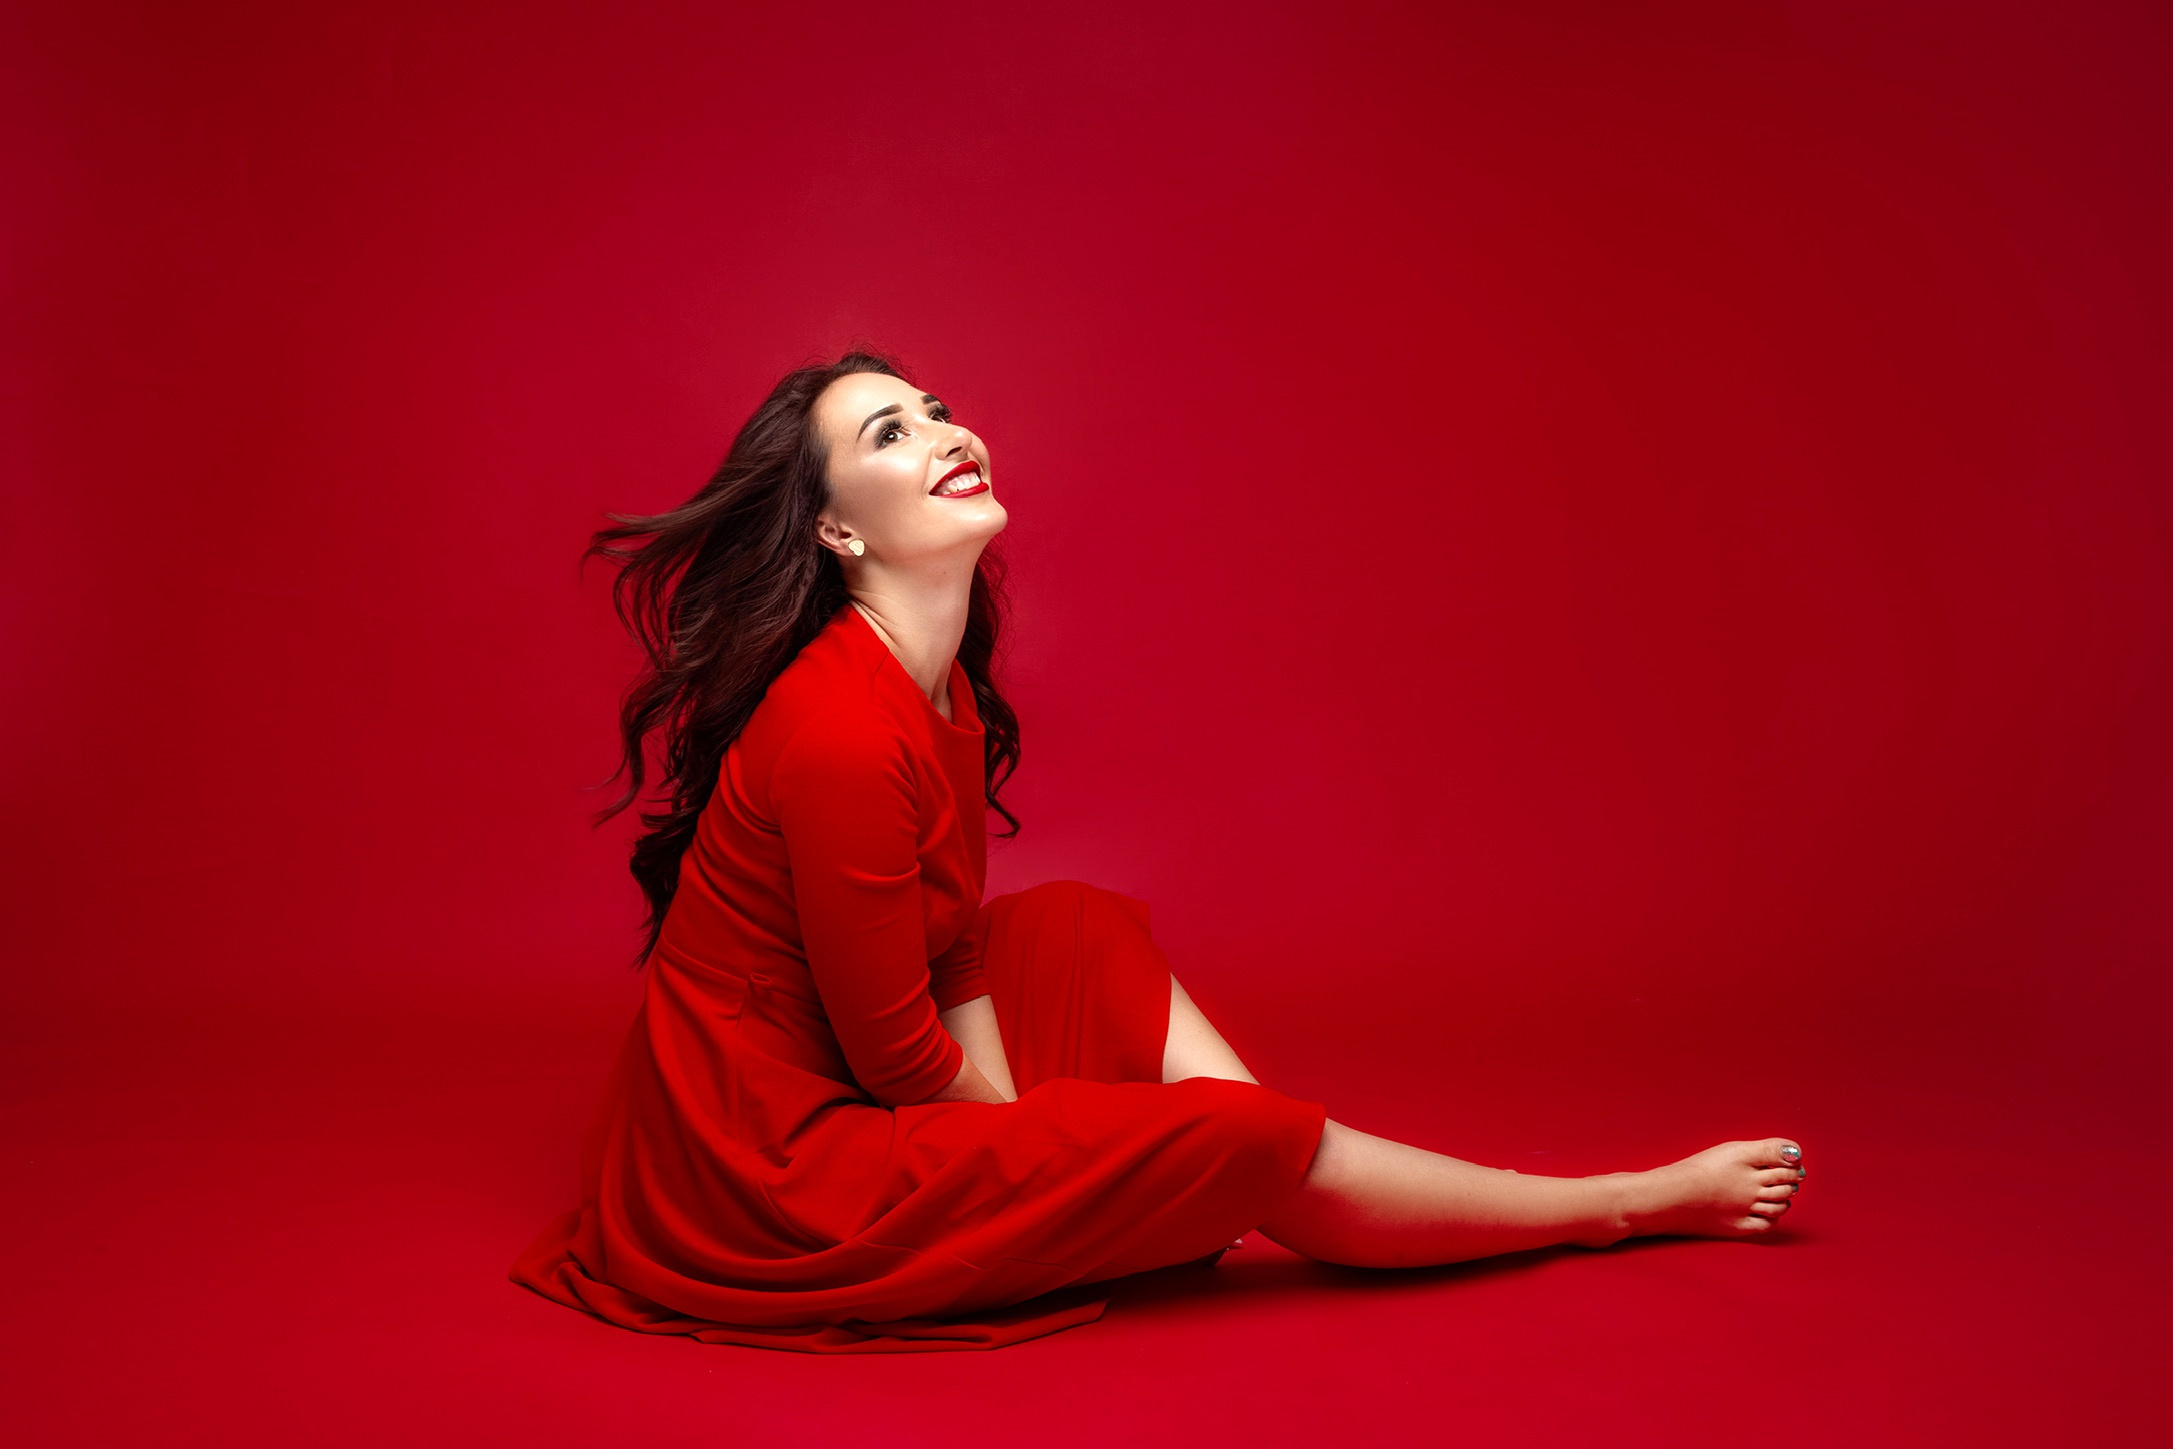 Free photo Charming woman in a red dress on a red background